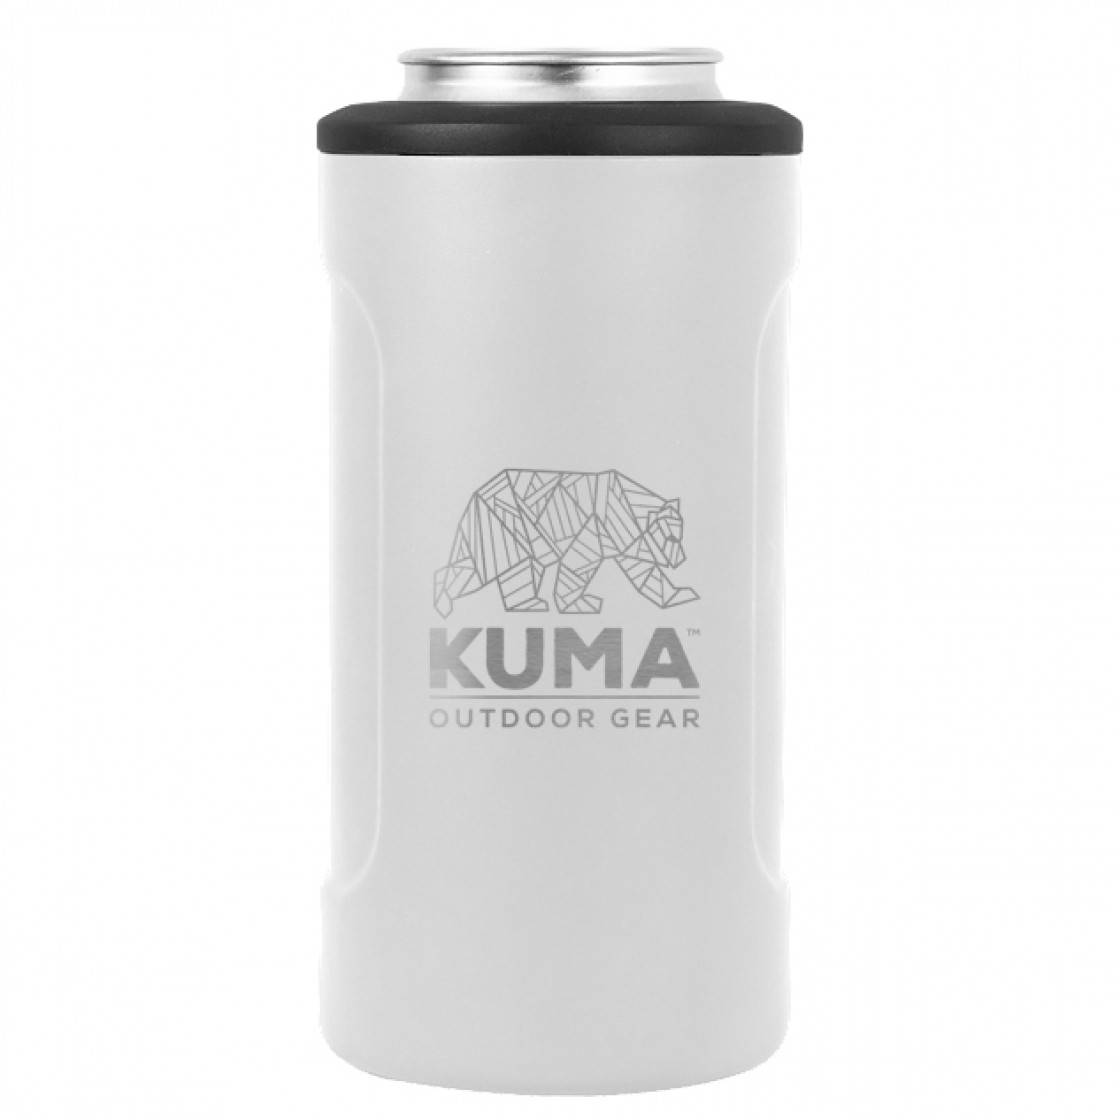 KUMA™ 3-in-1 Gear Outdoor | Coozie